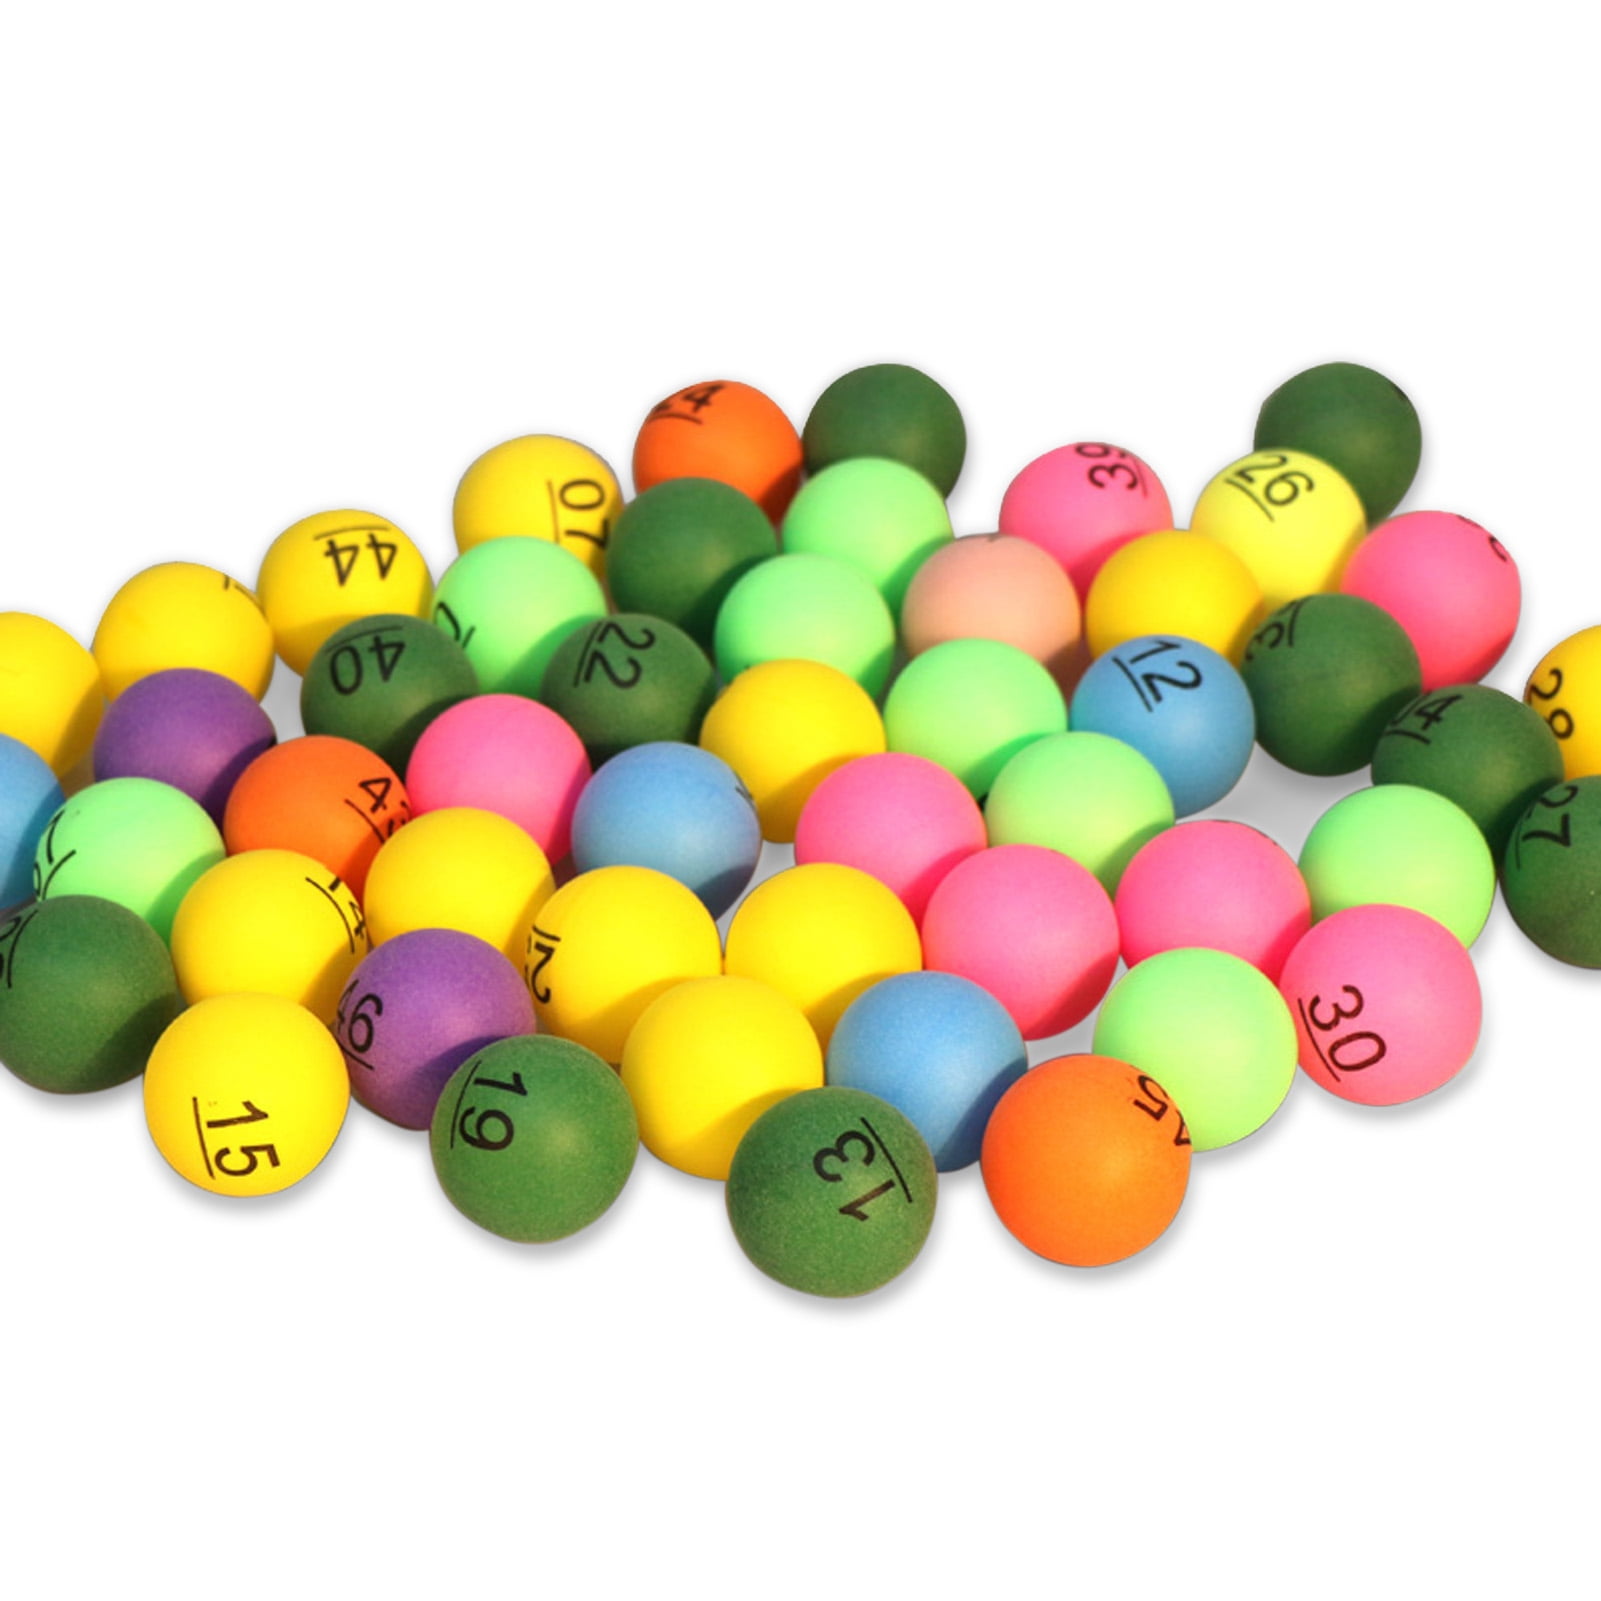 50PCS Mixed Color Table Tennis Ping Pong Ball Beer Pong Printed With Number 